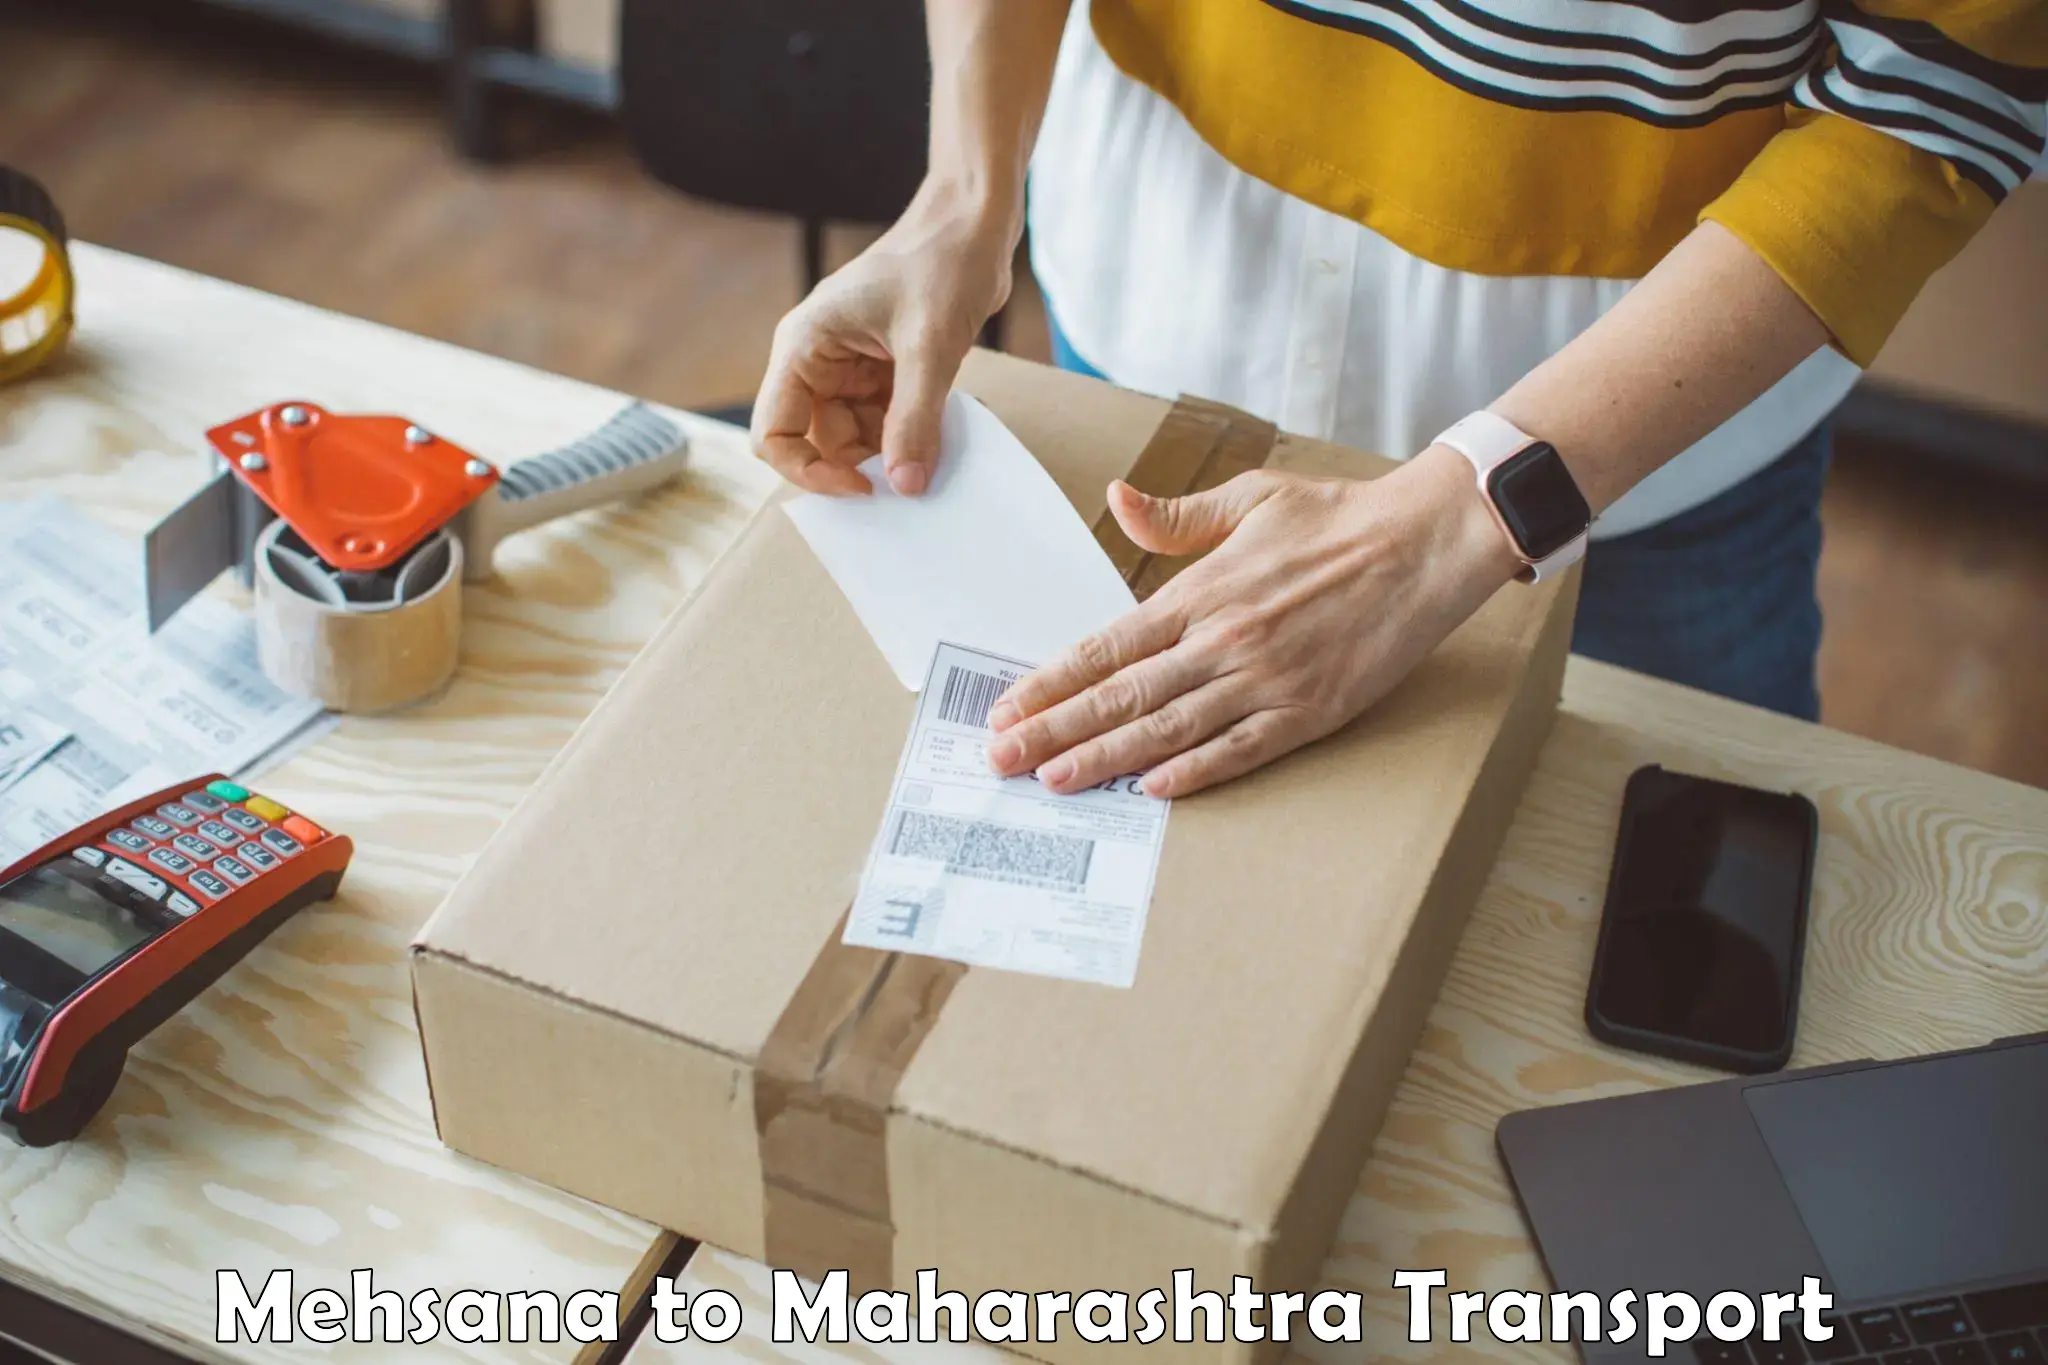 Truck transport companies in India Mehsana to Bhusawal